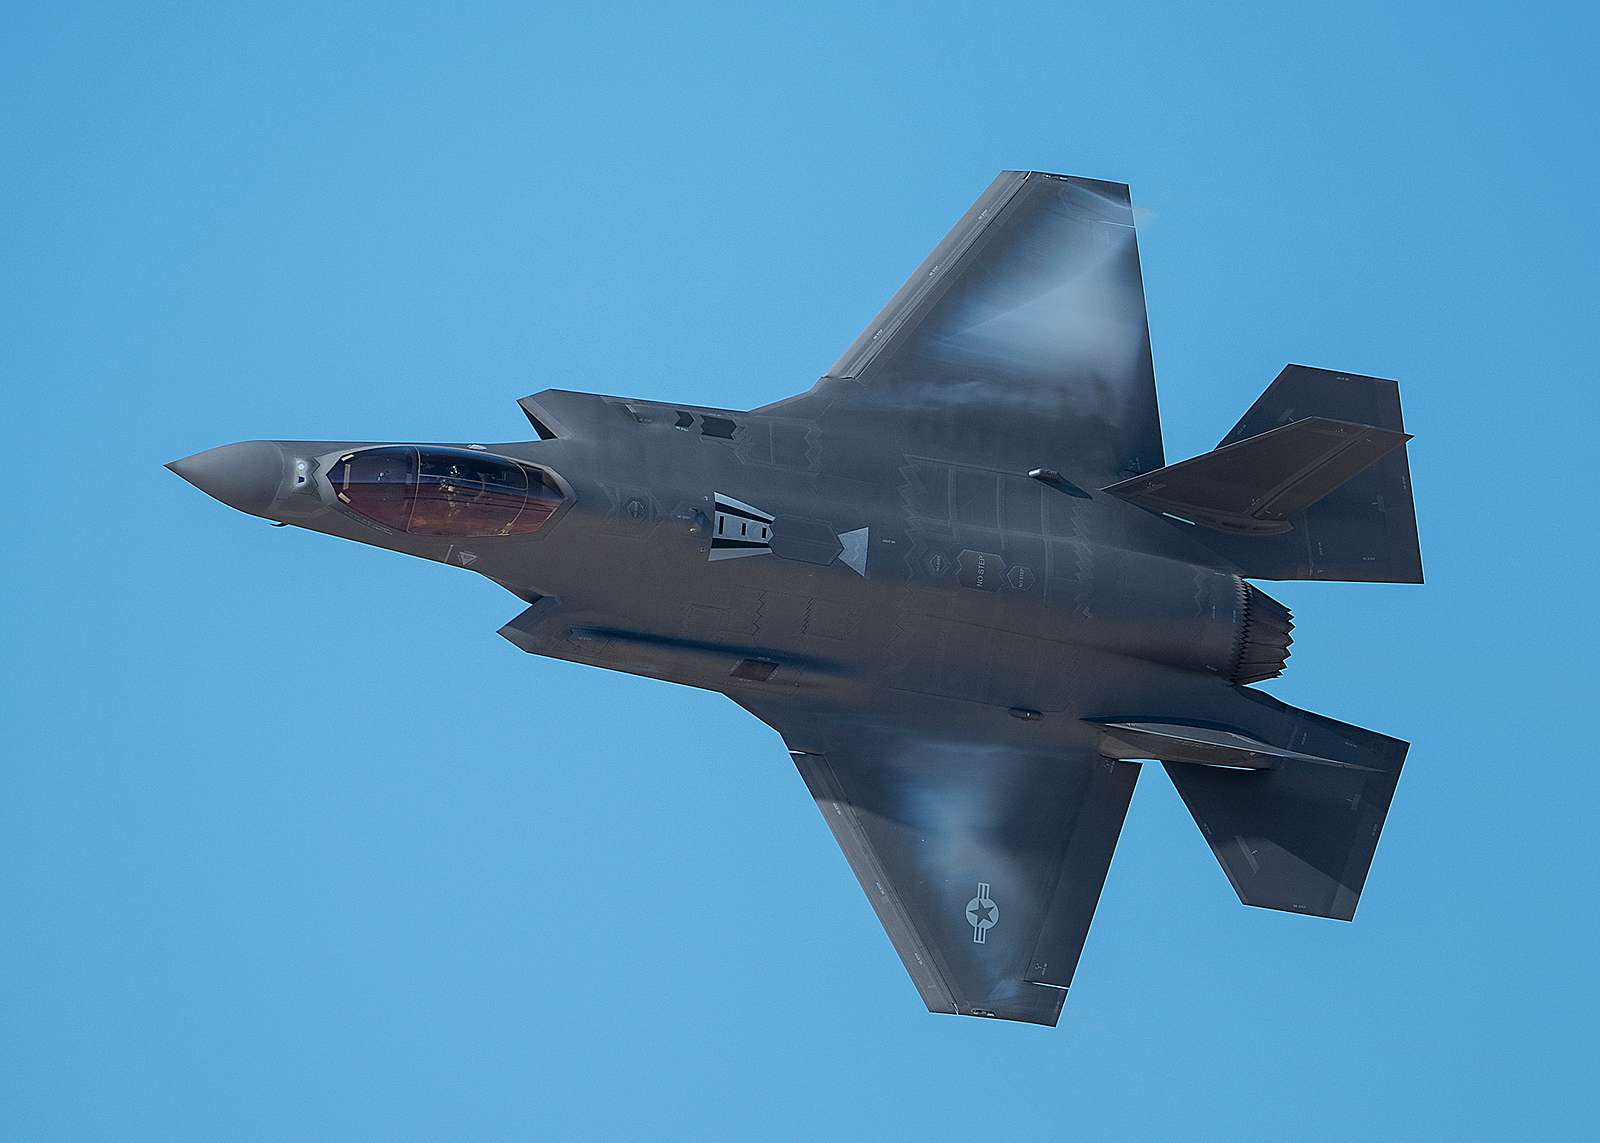 Blue Angels, F-22 Raptor and other planes amaze 38,000 at